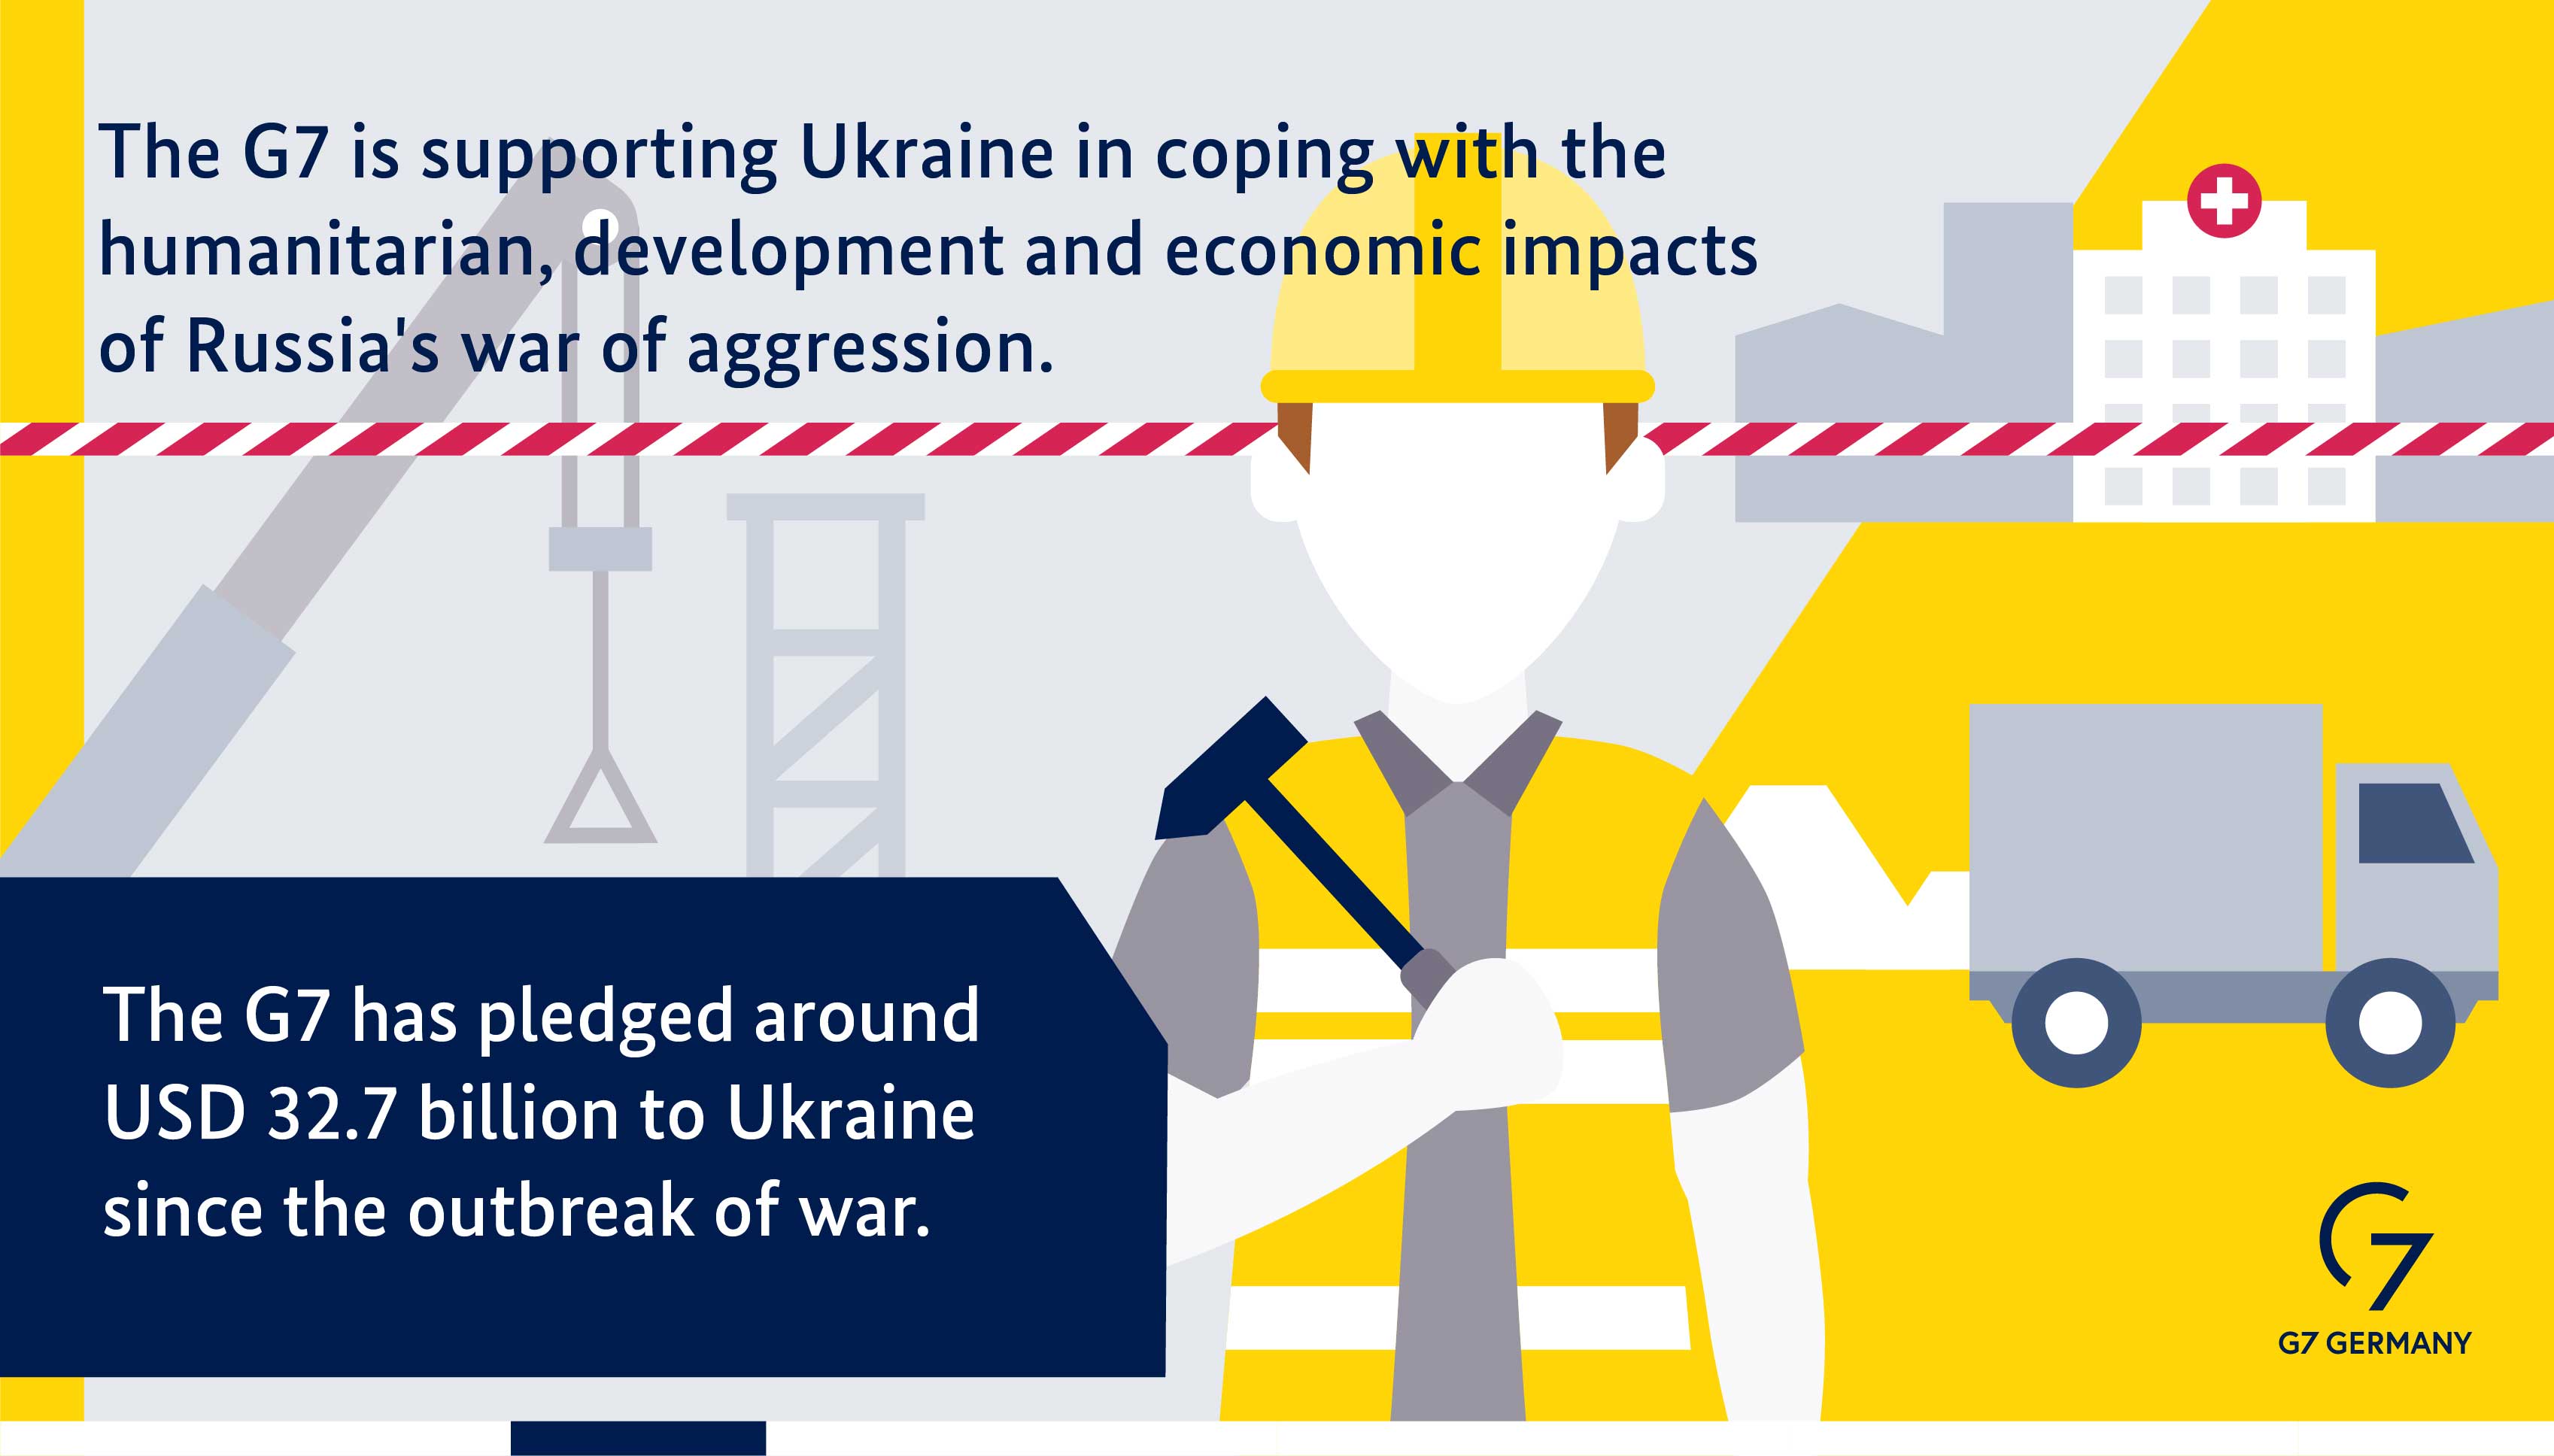 The G7 is helping Ukraine respond to humanitarian, development and economic impacts of Russia's war of aggression. The G7 has pledged around 32.7 billion US dollars to Ukraine since the war began.